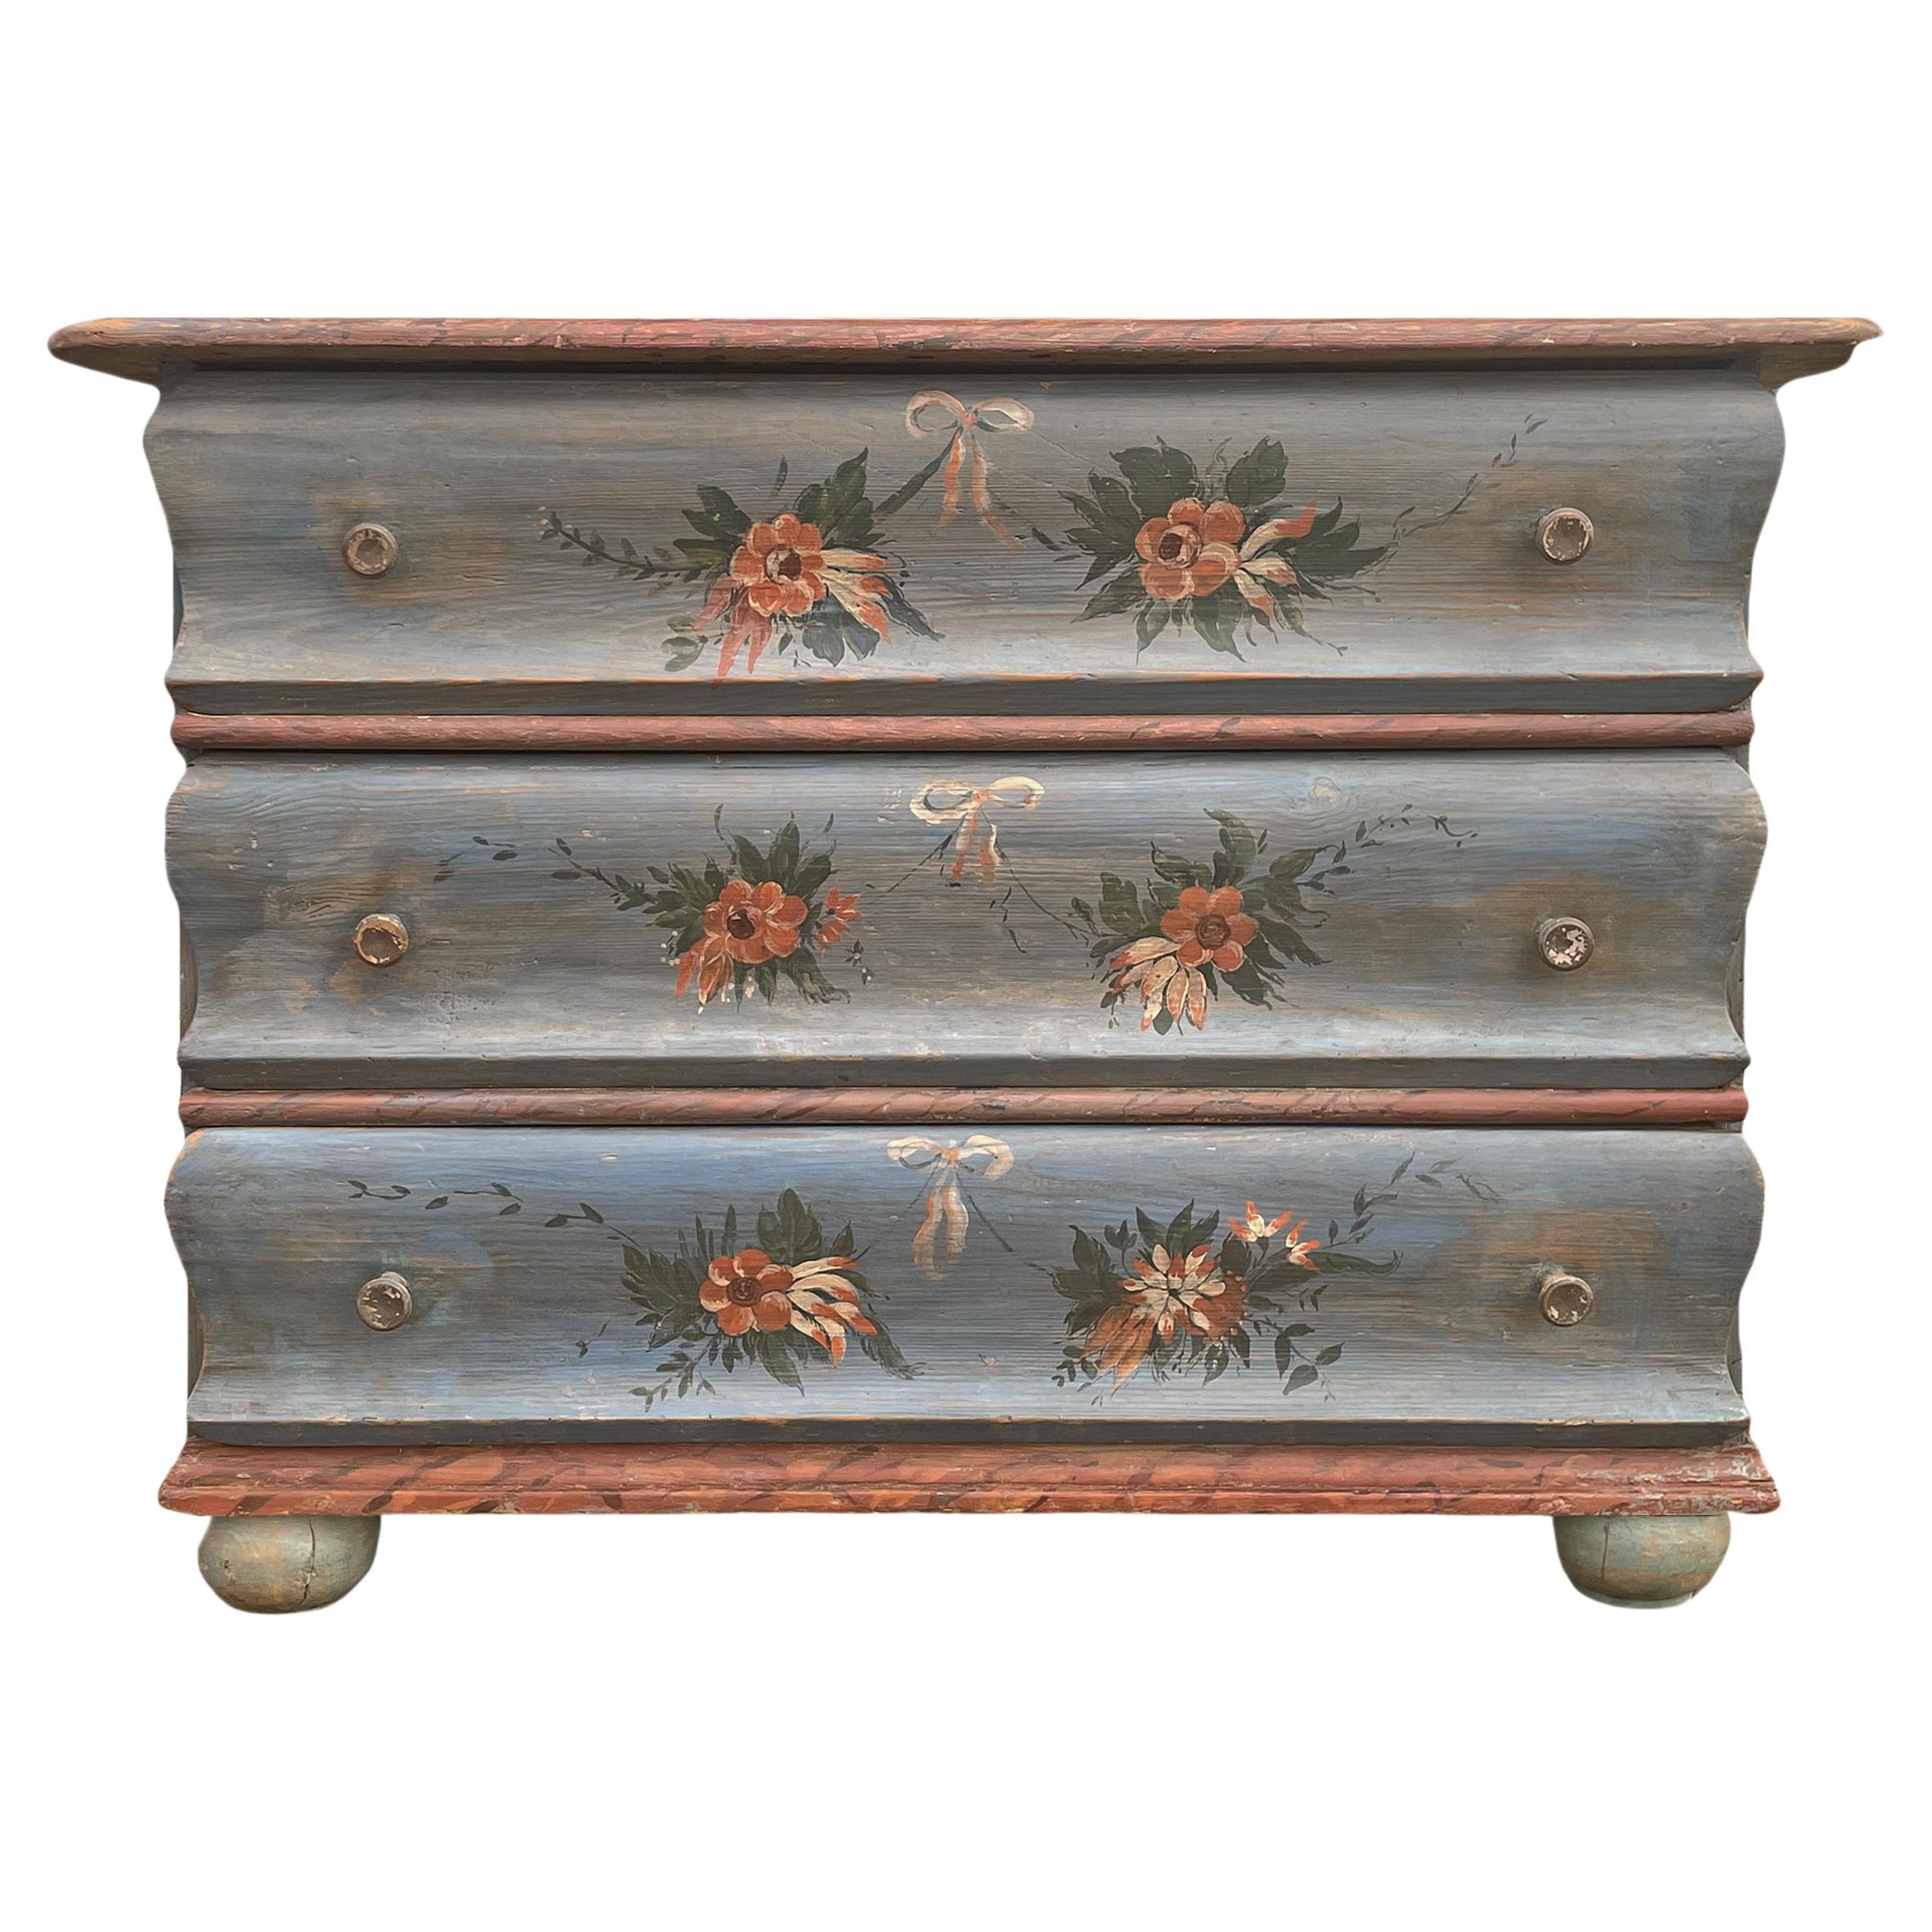 Blu Floral Painted Chest of Drawers, Northern Italy 1850